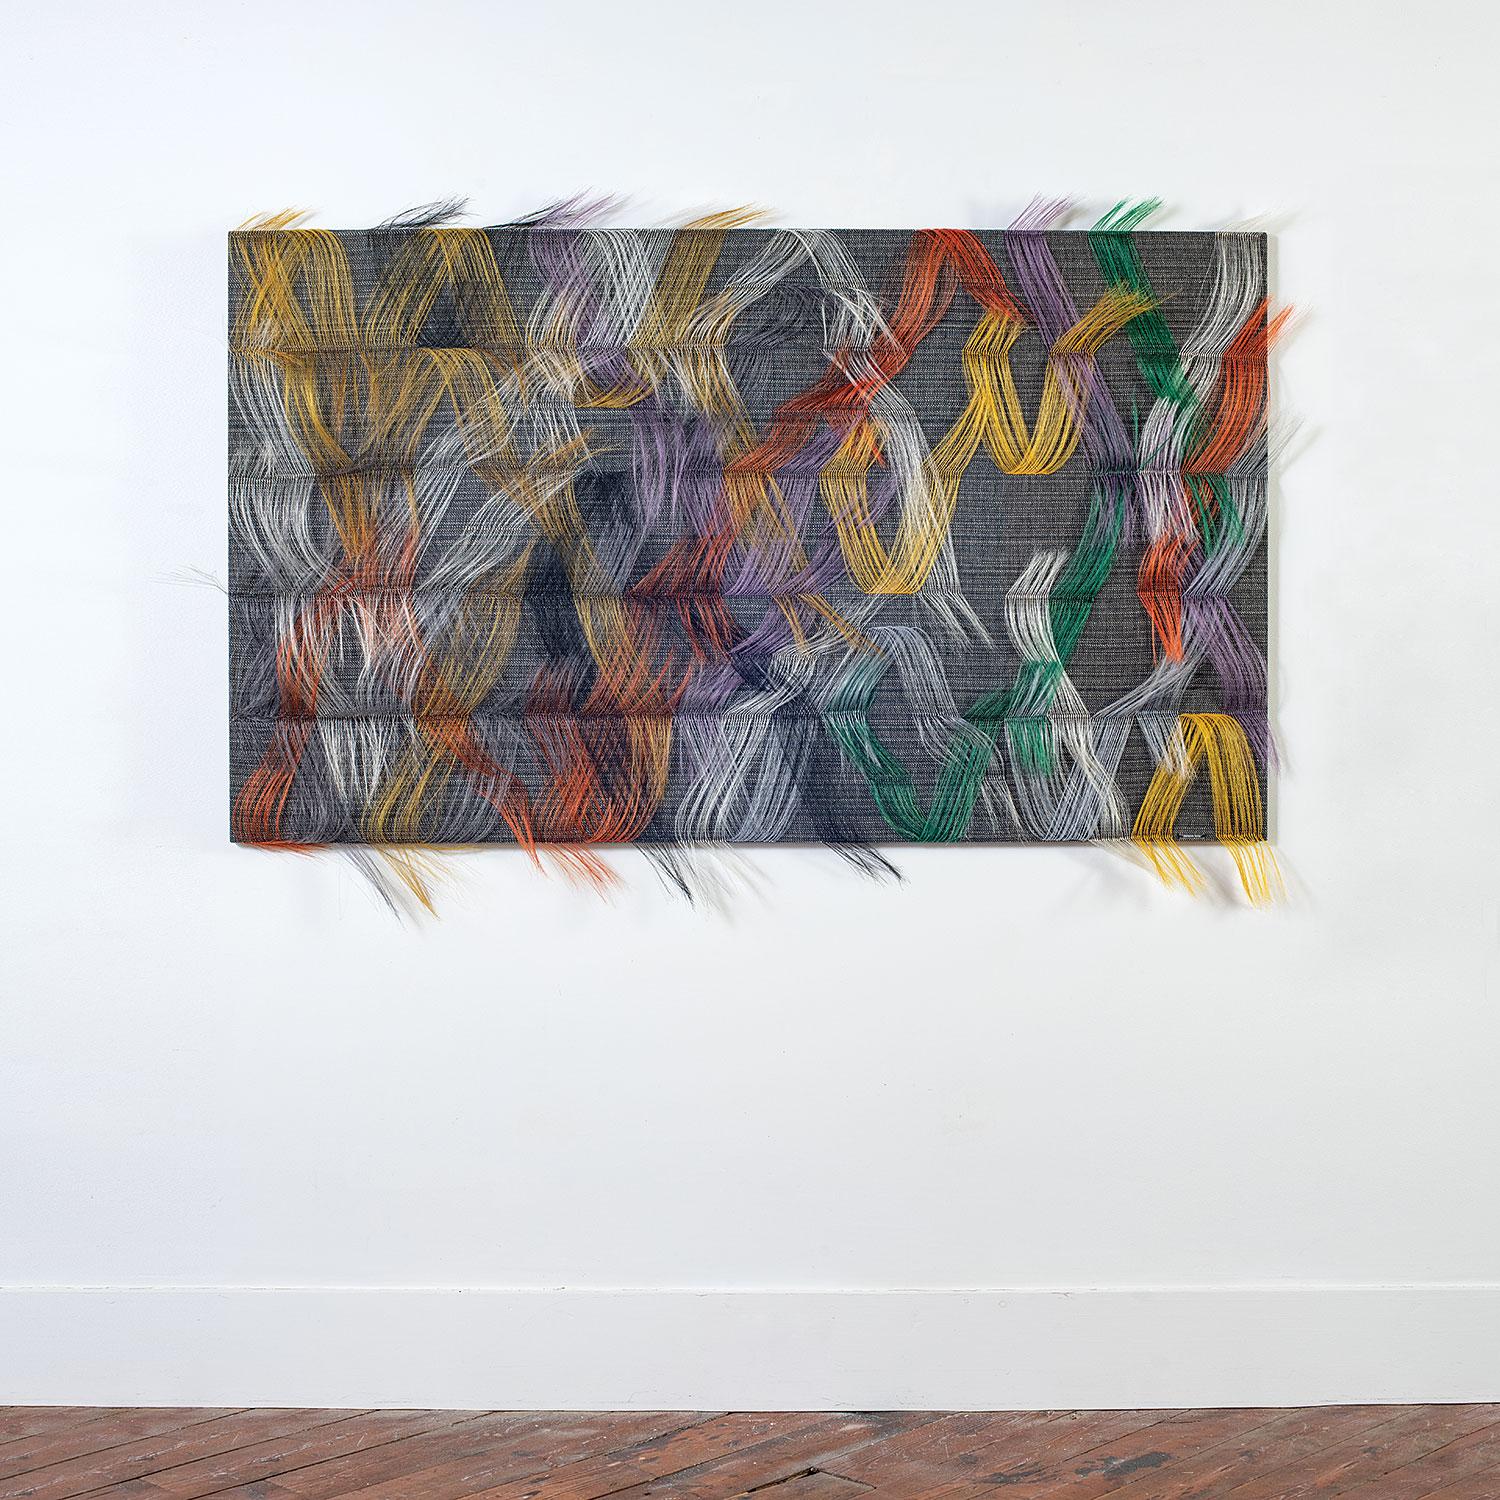 Marianne Kemp Abstract Sculpture - "Vibrant Conversation", Contemporary Abstract Textile Wall Sculpture